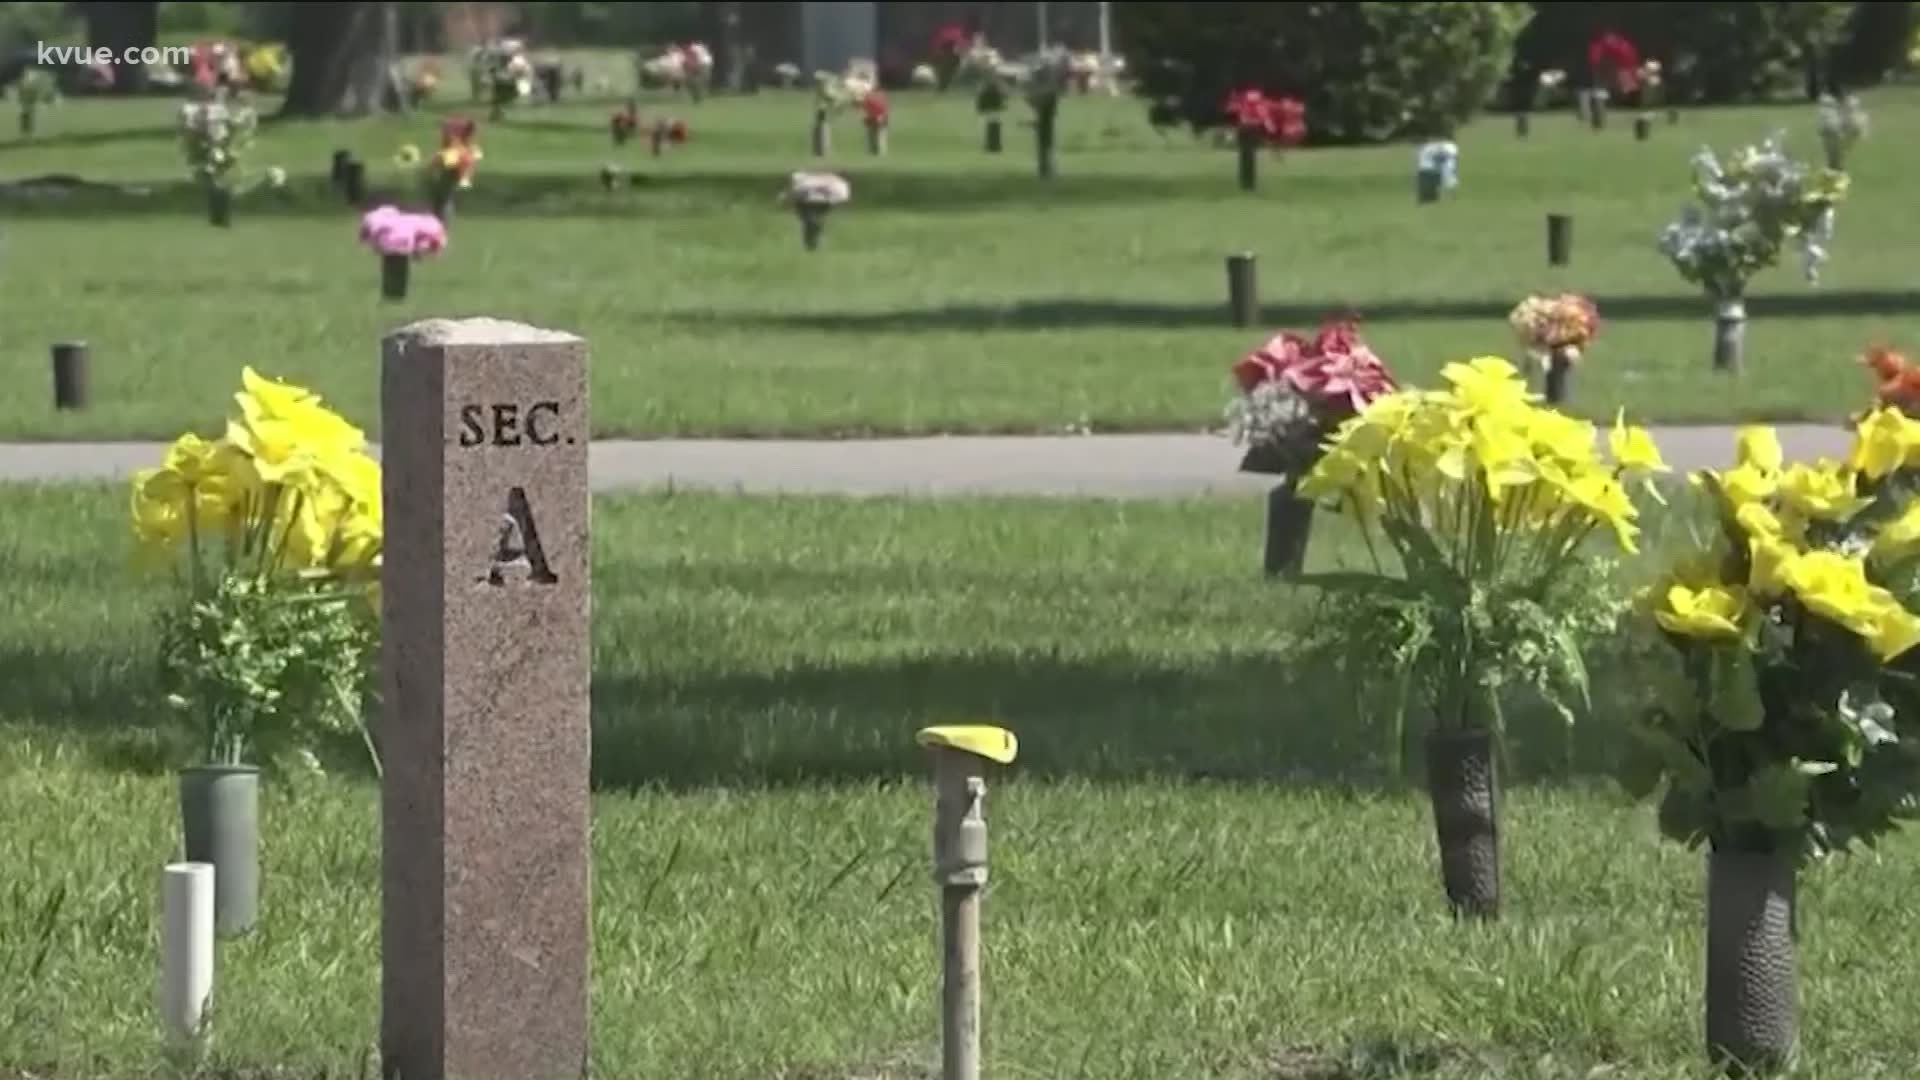 KVUE's Luis de Leon reports some funeral homes and crematories are having a hard time keeping up.